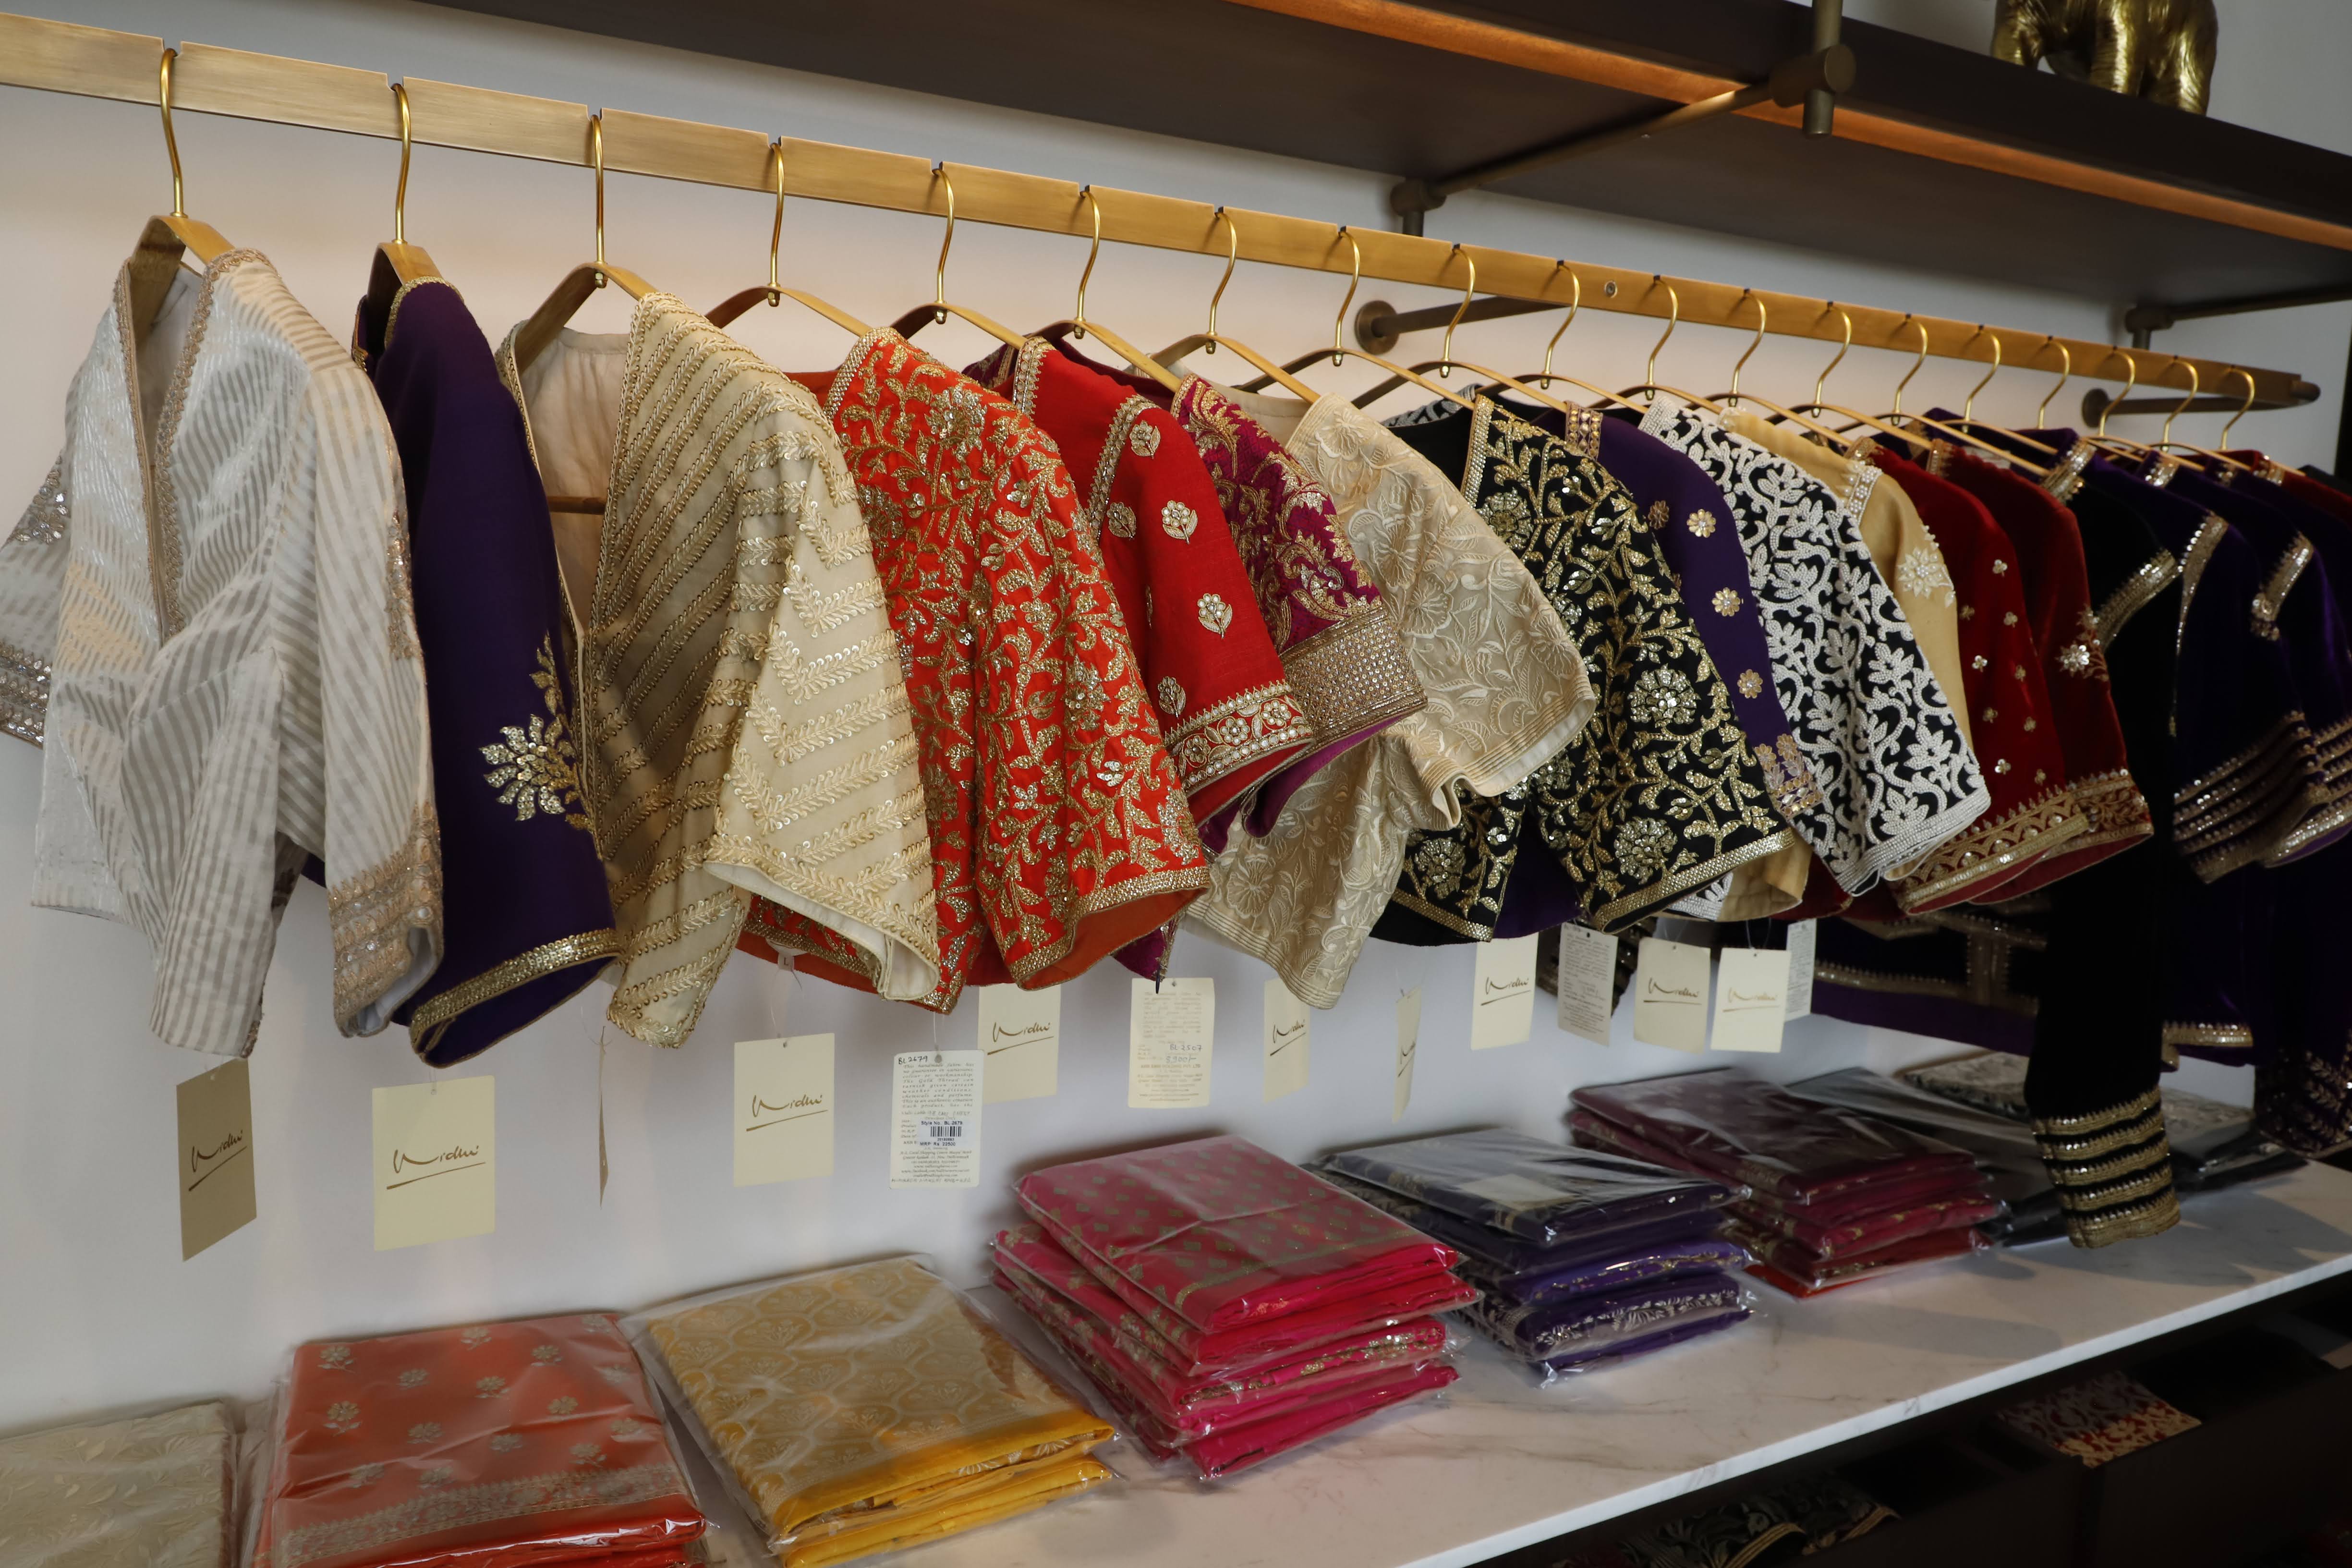 Vidhi Singhania Launches a New Store in New Delhi, Offering an Exquisite Collection of Handwoven Heirlooms